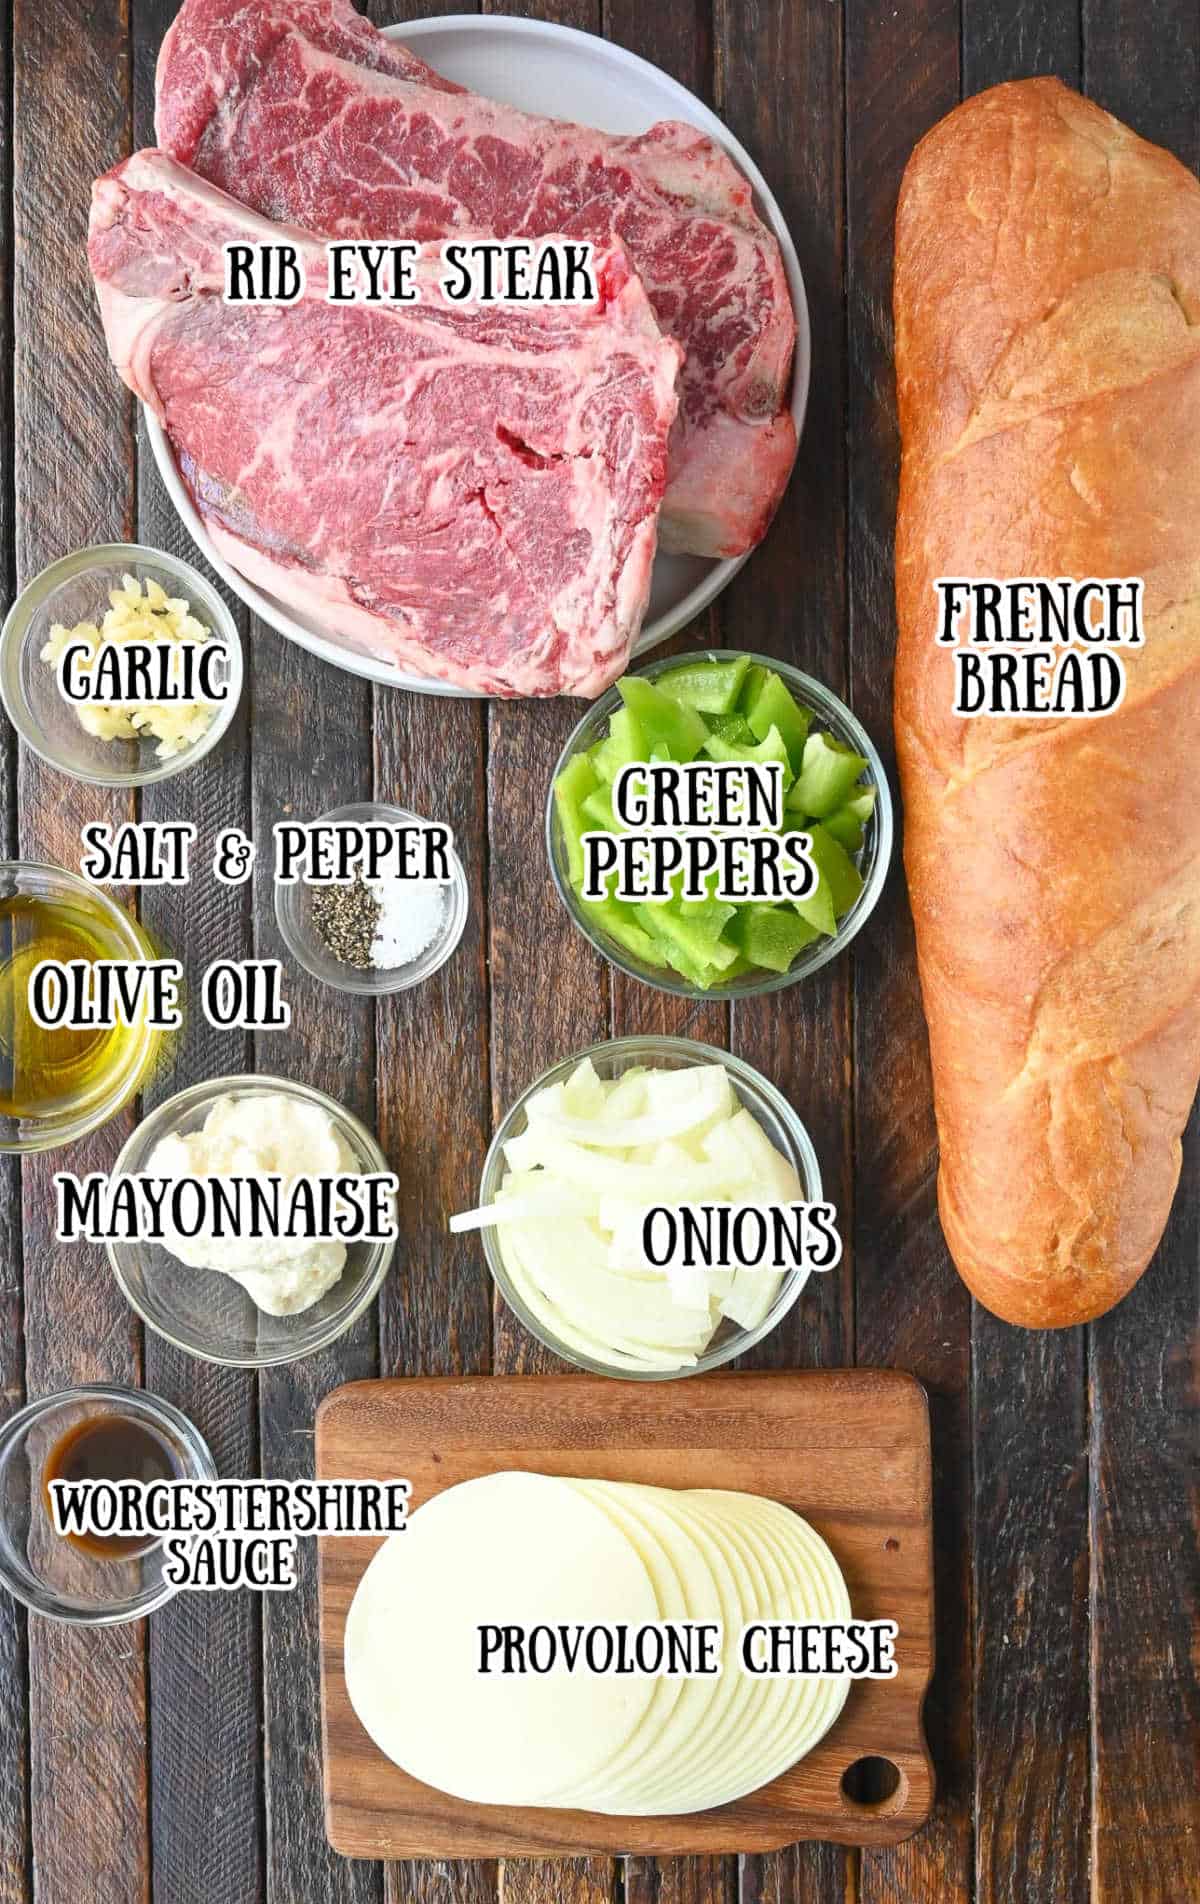 All the ingredients needed for philly cheesesteak french bread pizza.